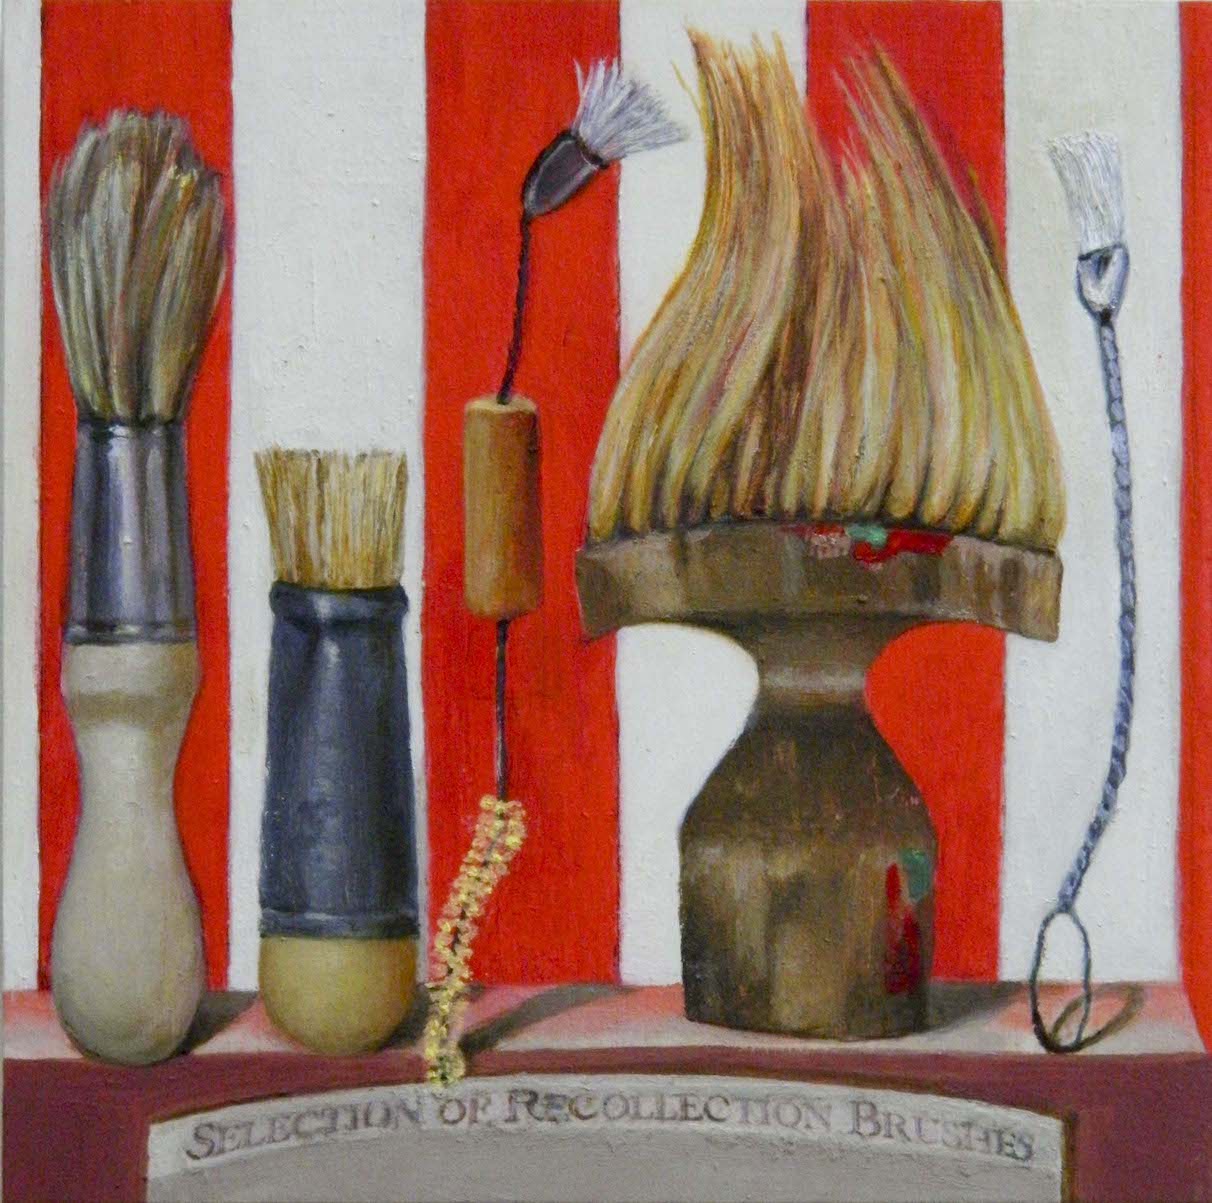 Recollection Brushes